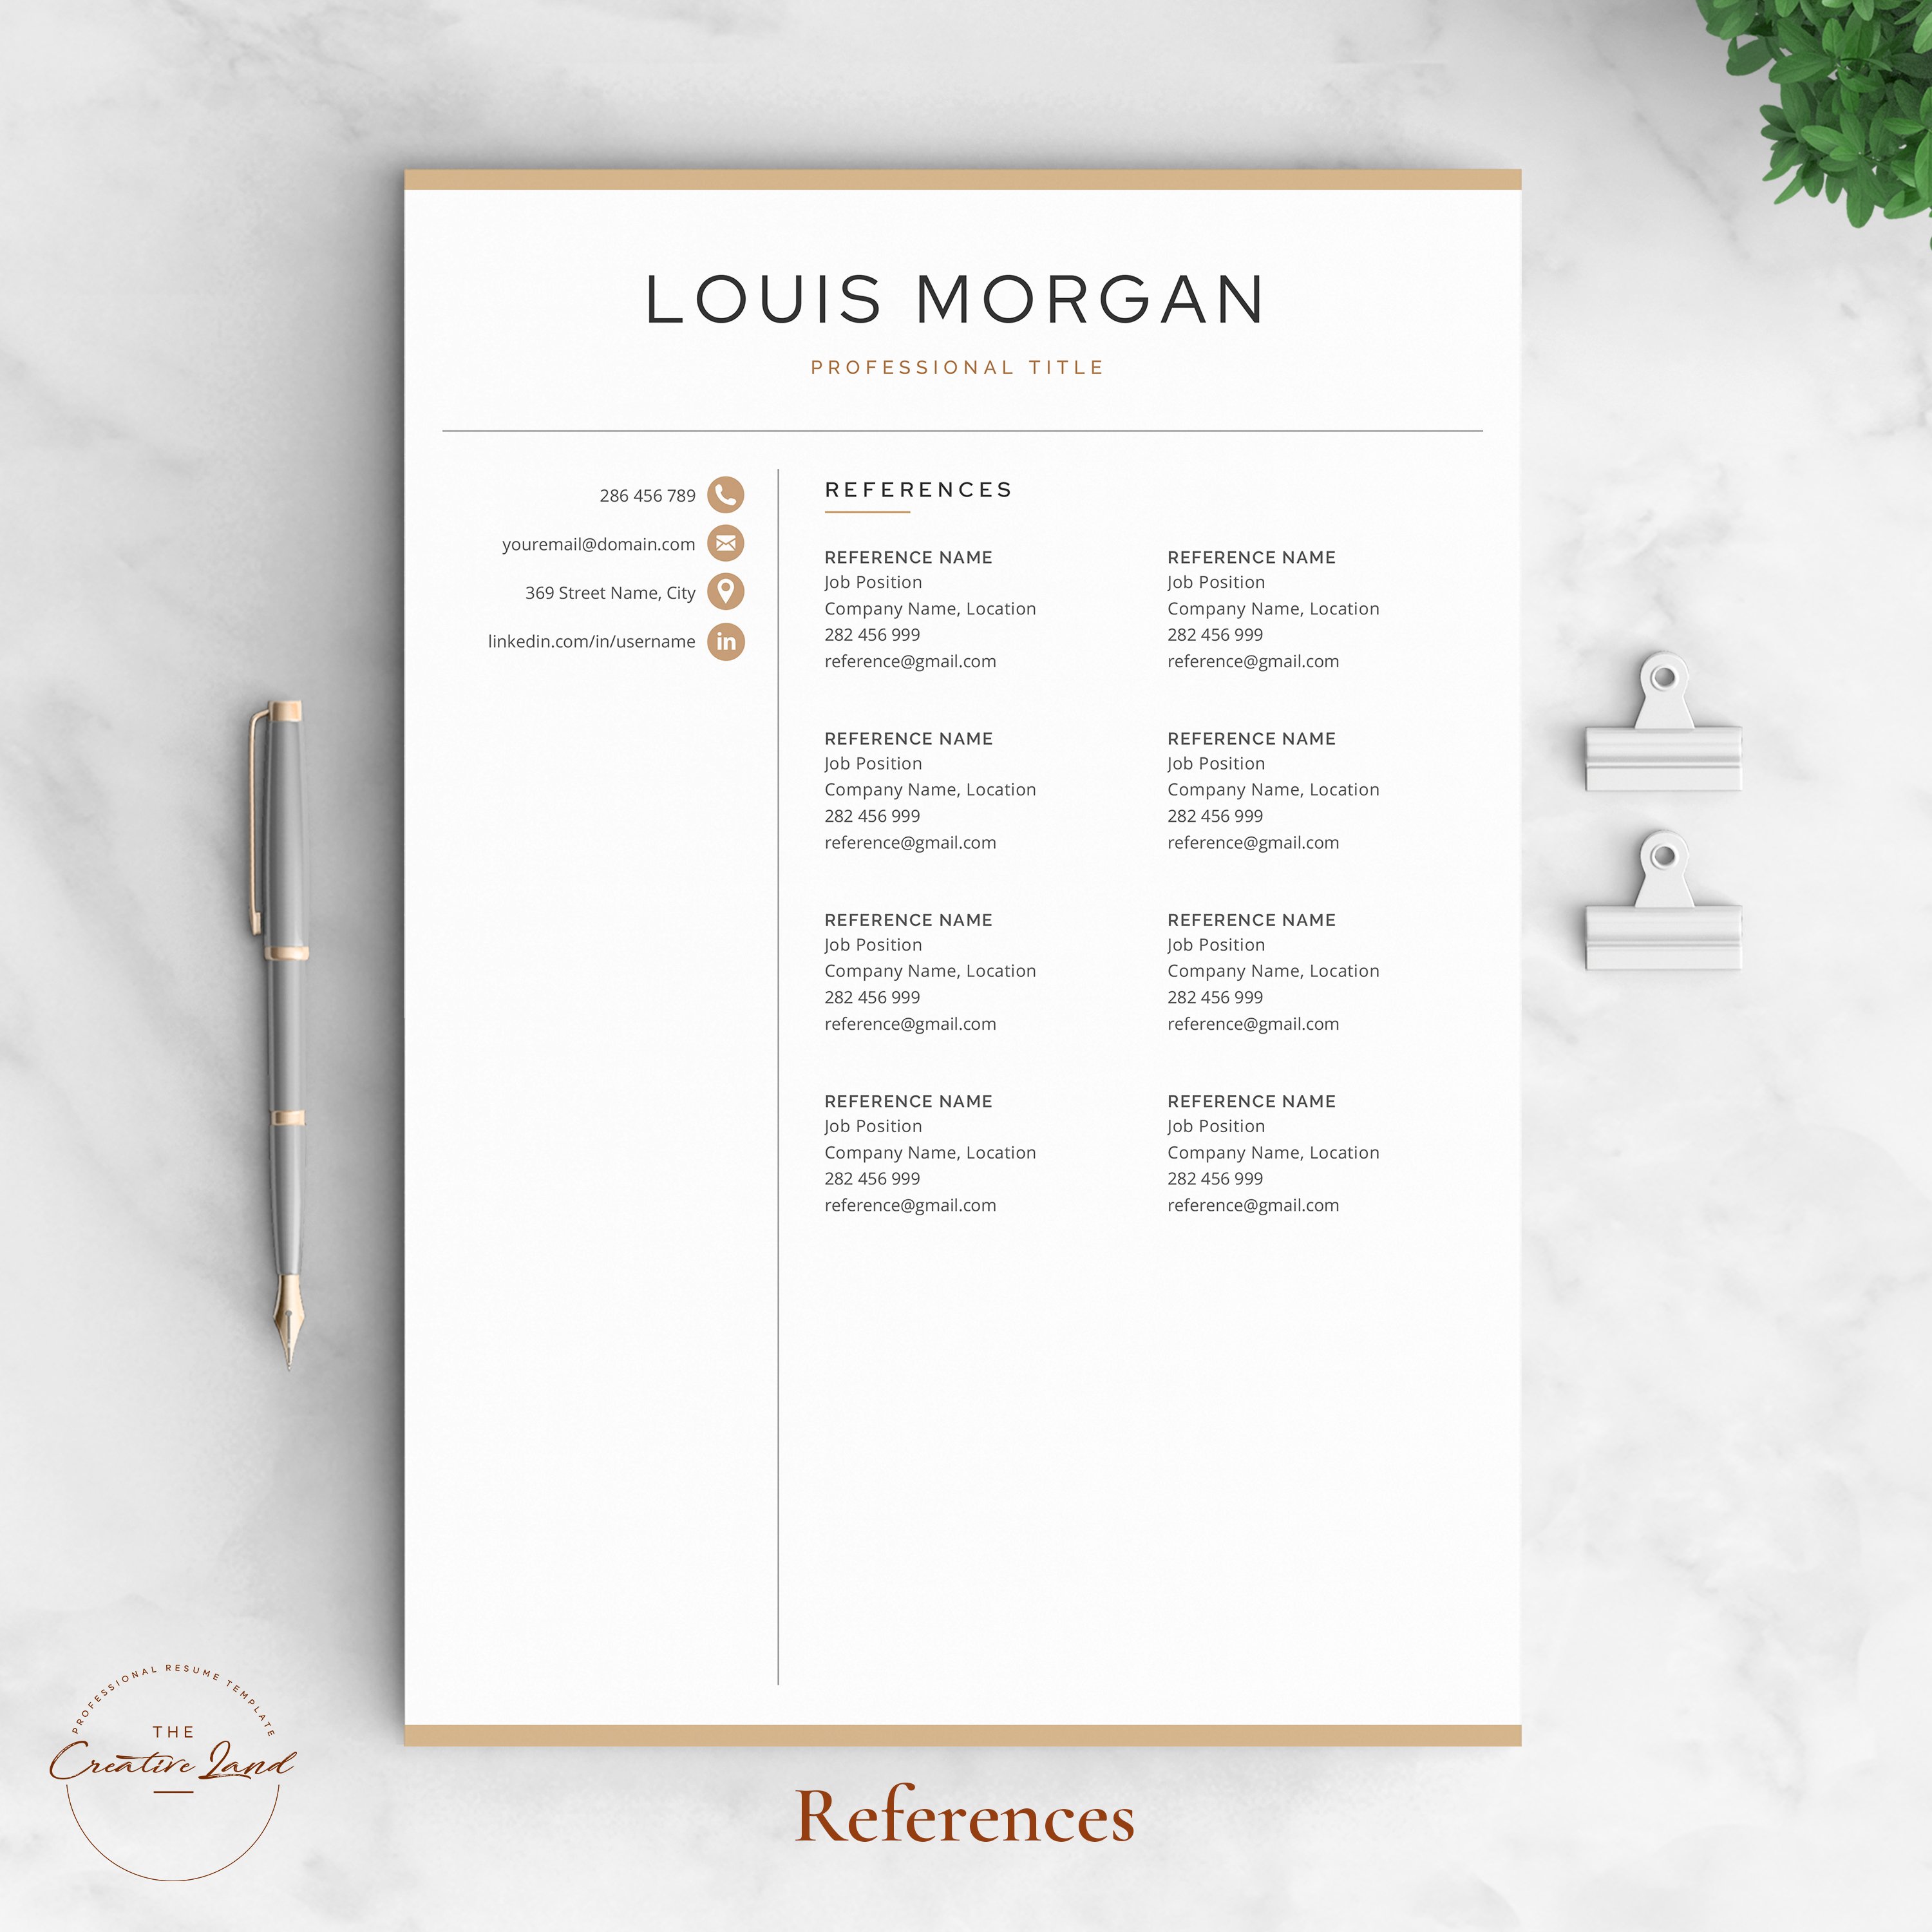 Professional resume template with a gold border.